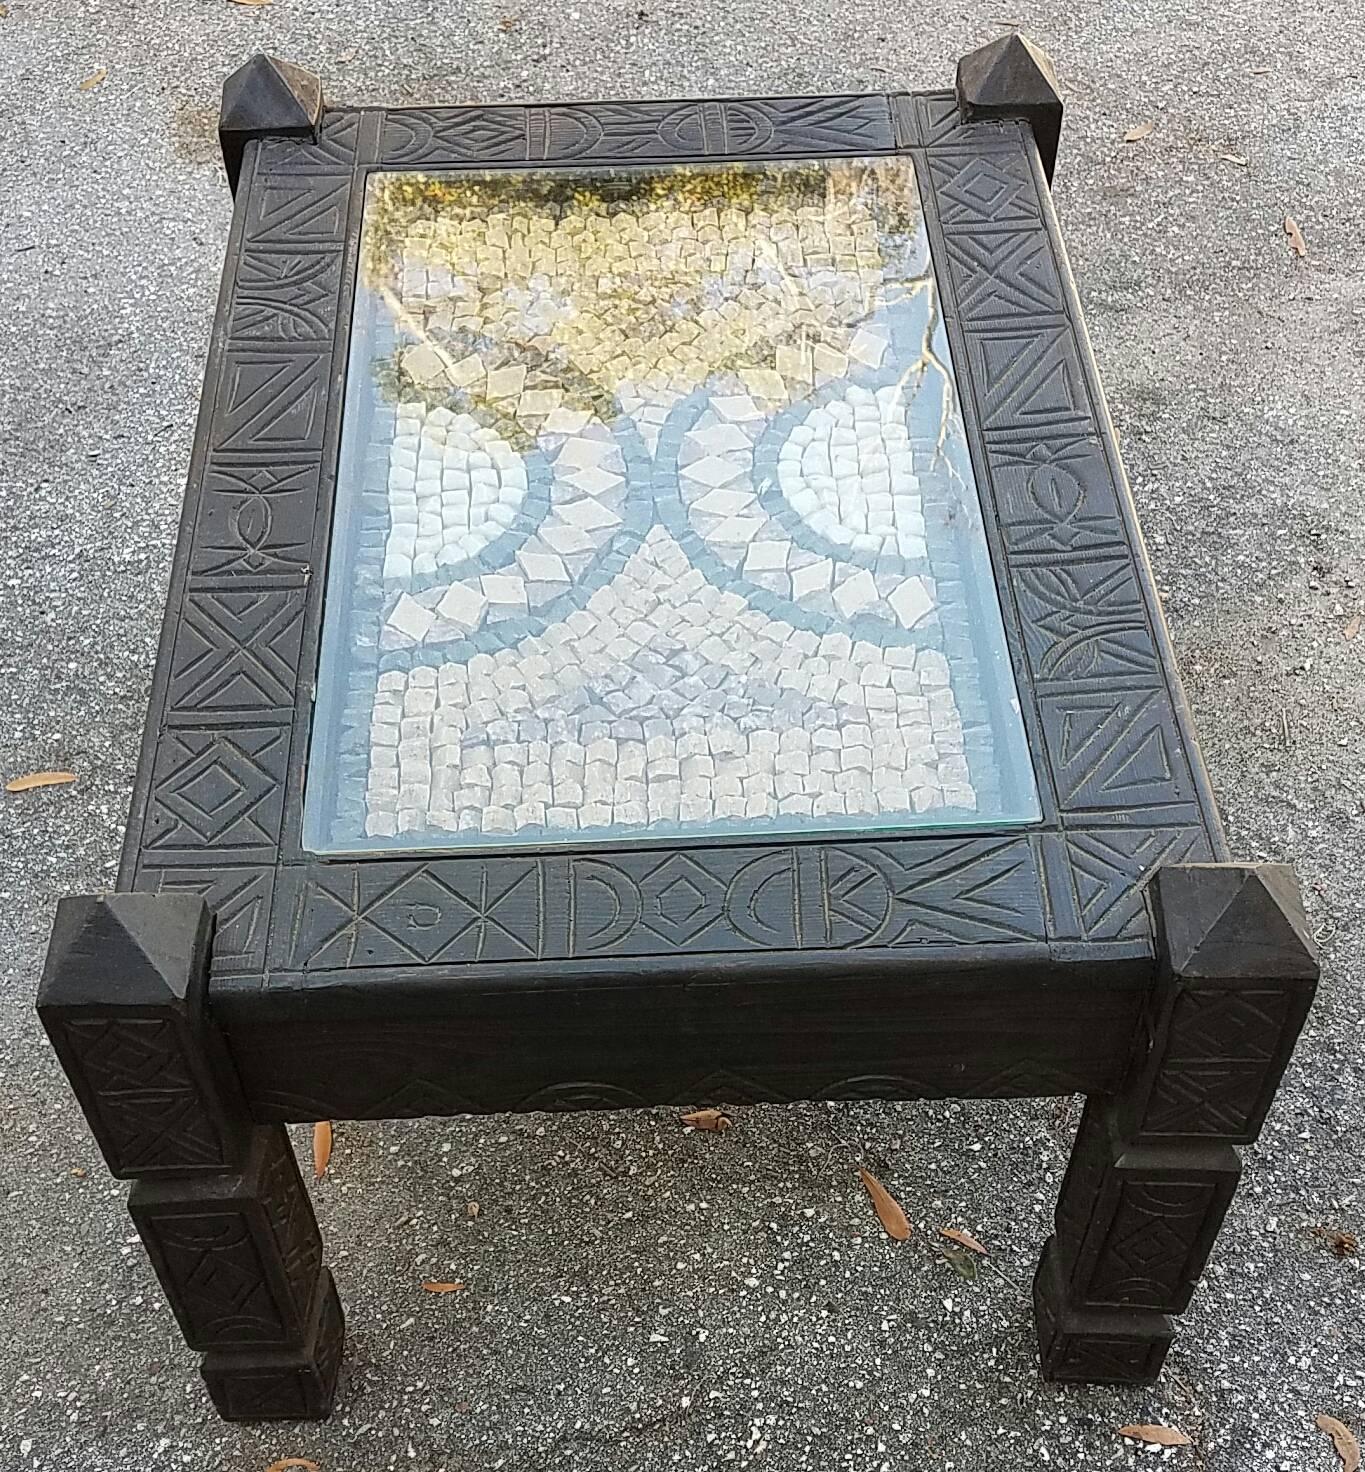 Hand-carved wood and inlaid marble tiles coffee table. Moroccan origin. Rectangular shape. This table brings together the art of tile laying along with wood sculpting, both Moroccan traditions. Measures approximately 32” in length and 23” in width.